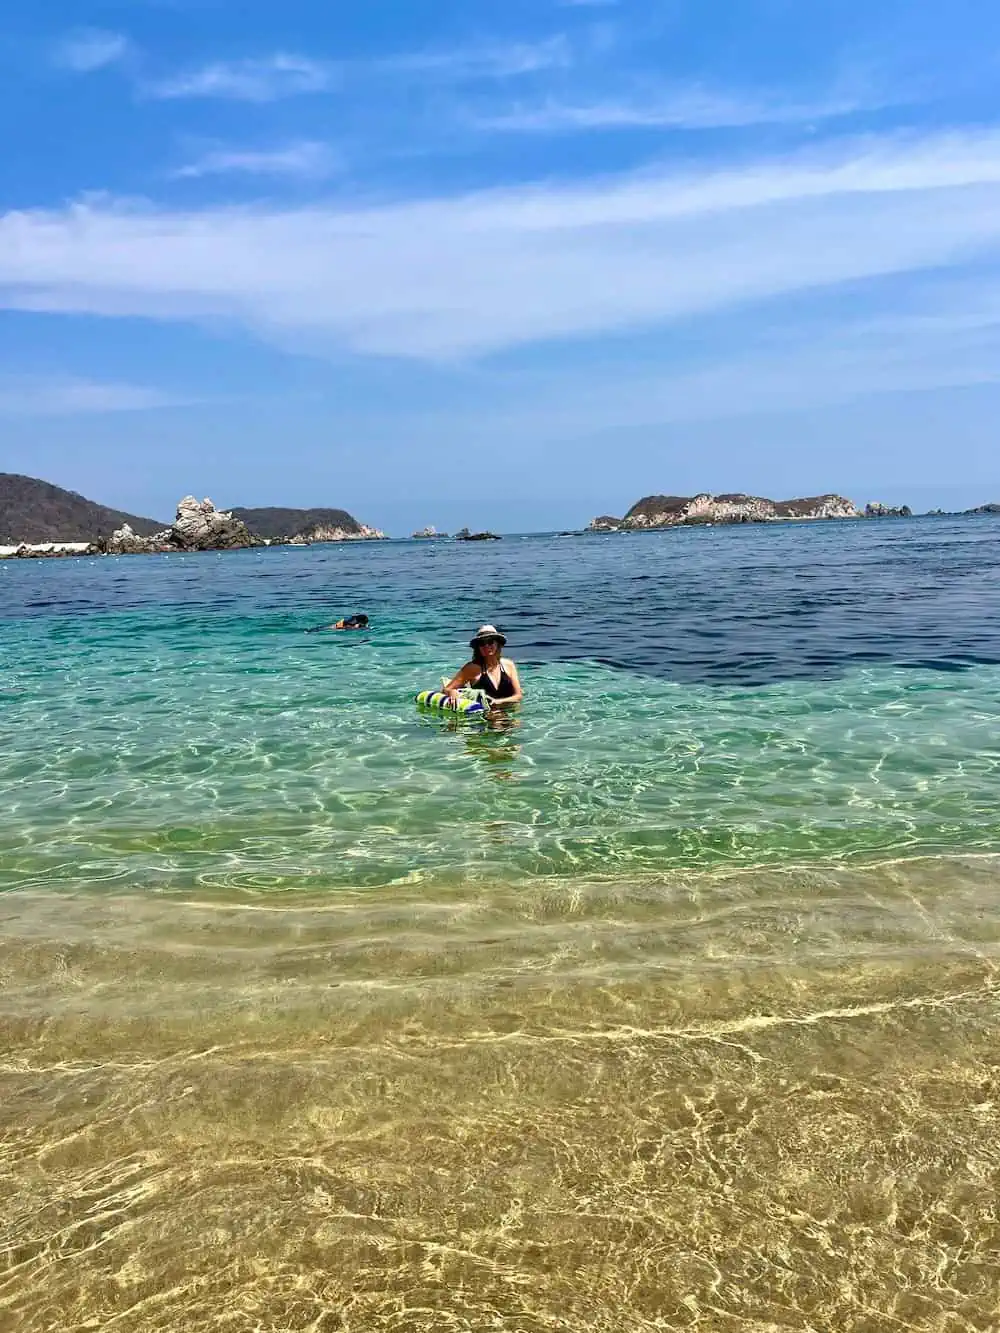 A person snorkeling and another person standing in clear water at Playa San Agustin, Huatulco)